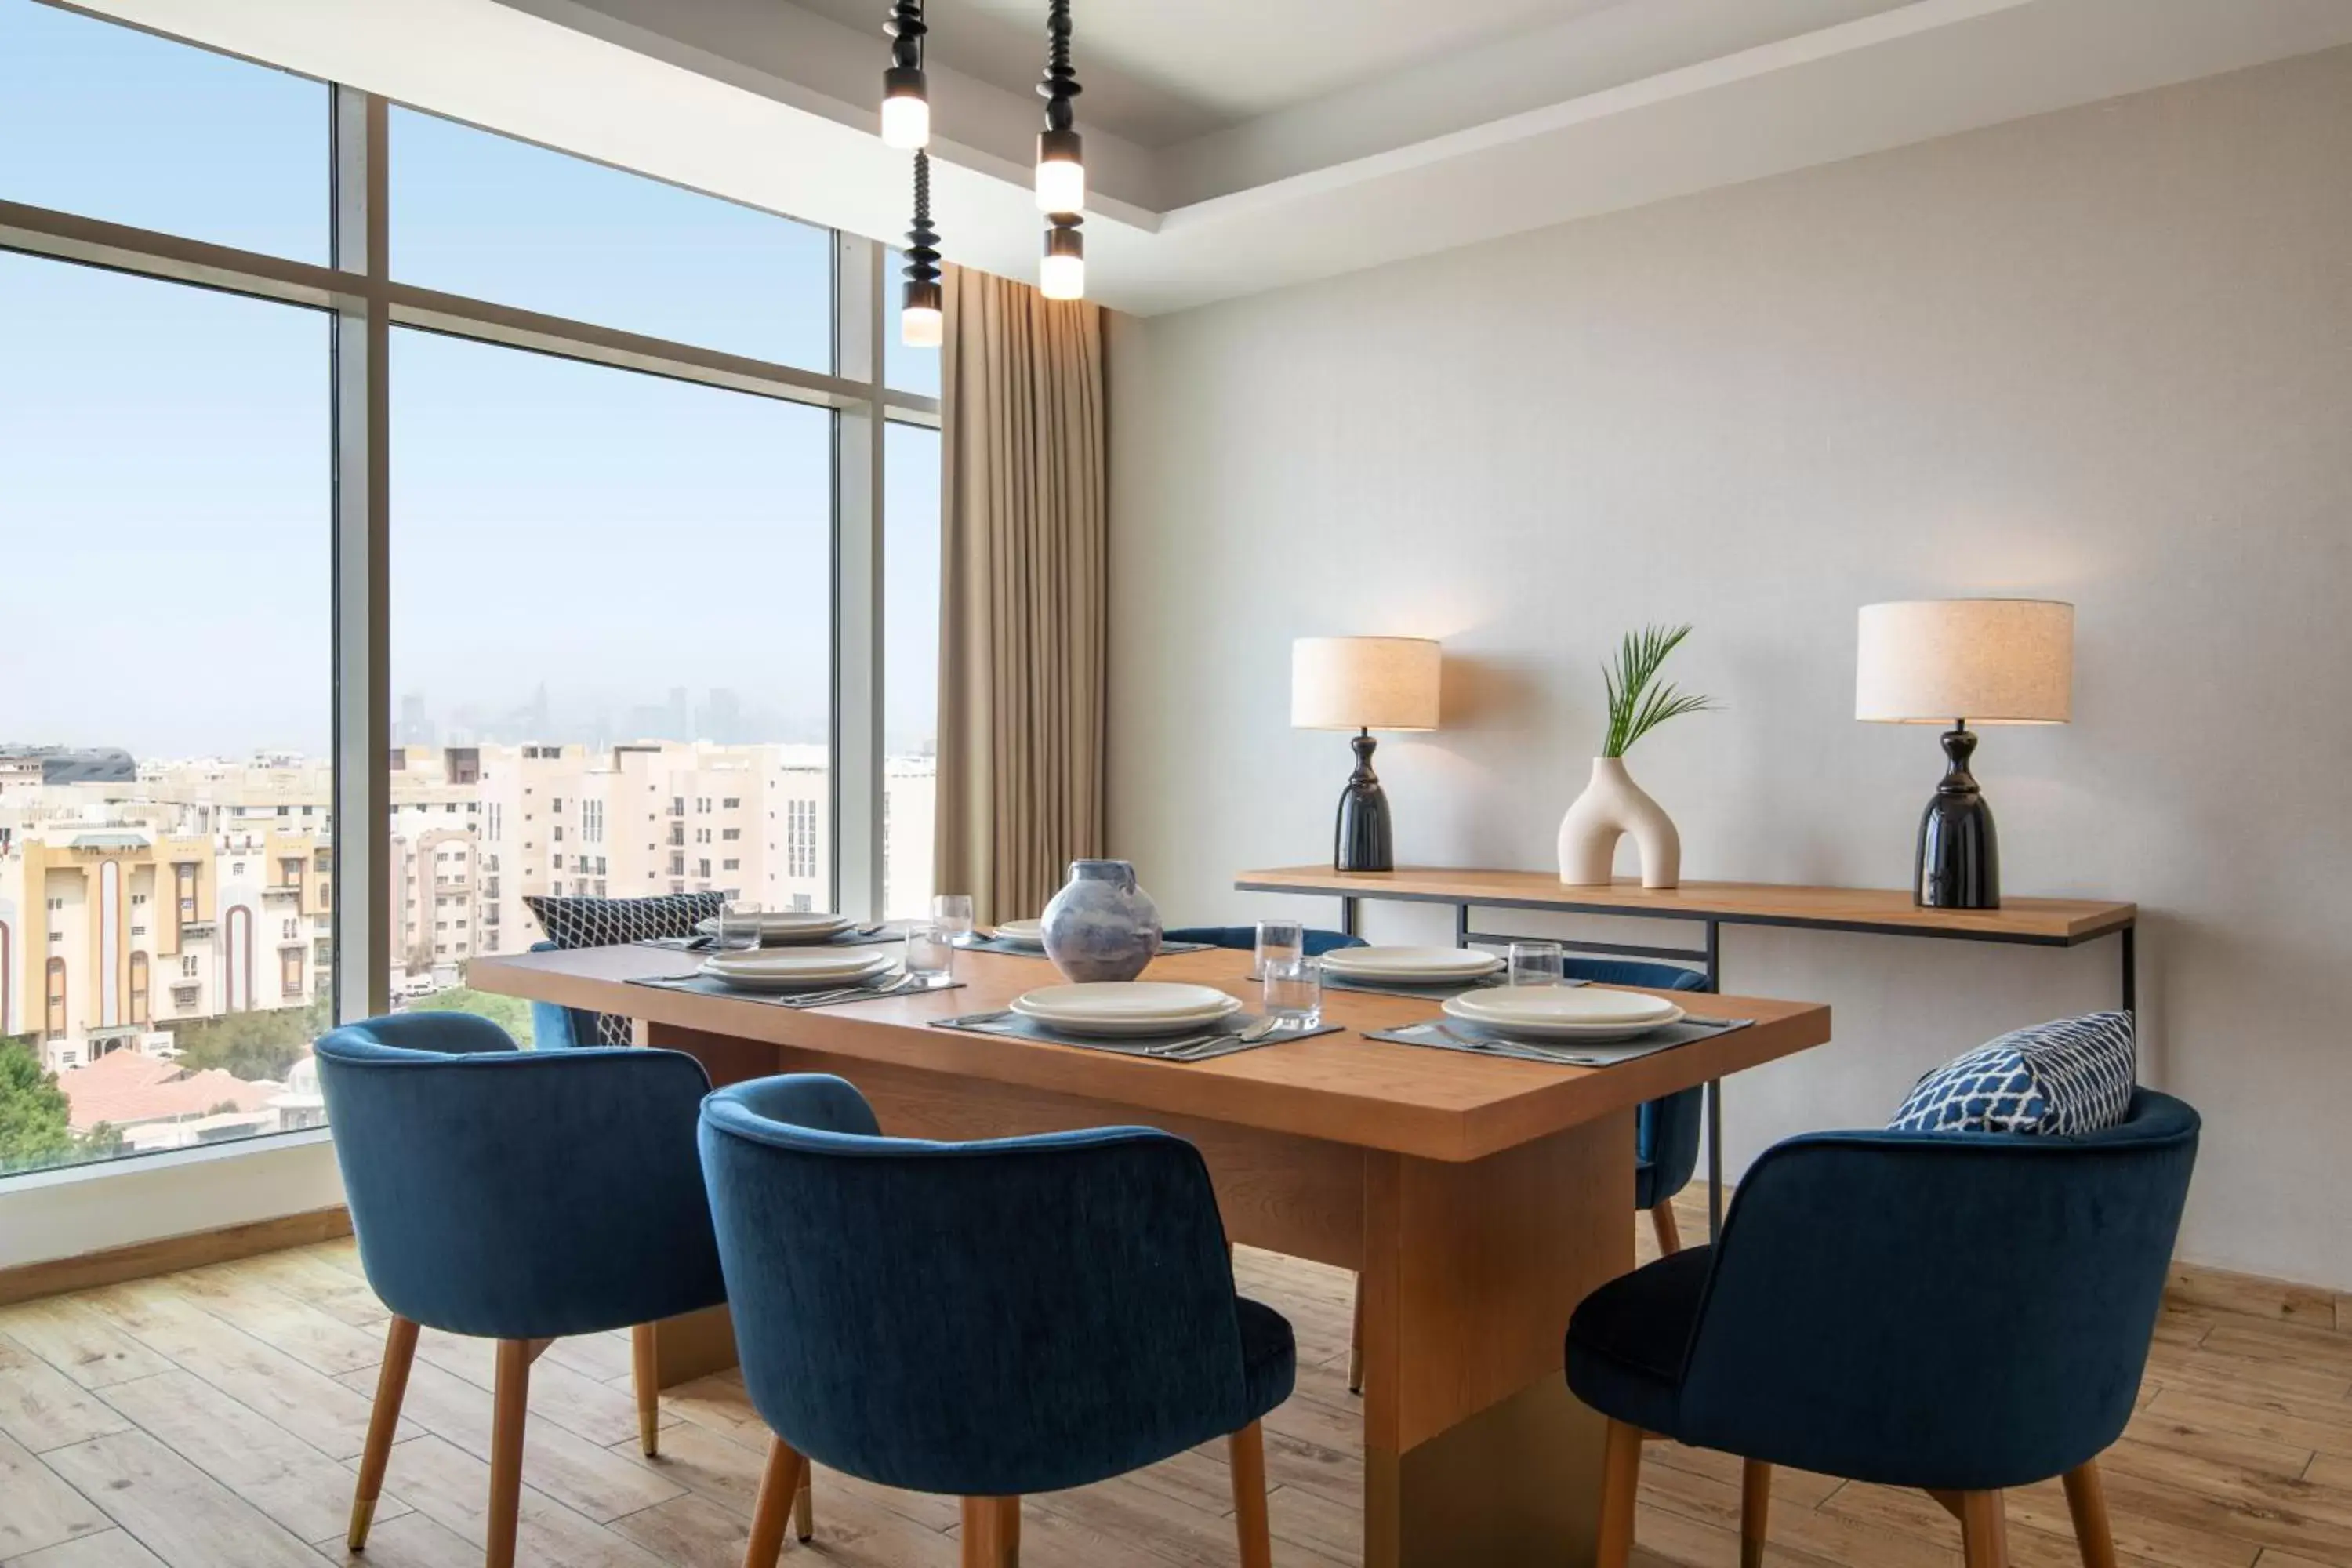 Dining area in Abesq Doha Hotel and Residences